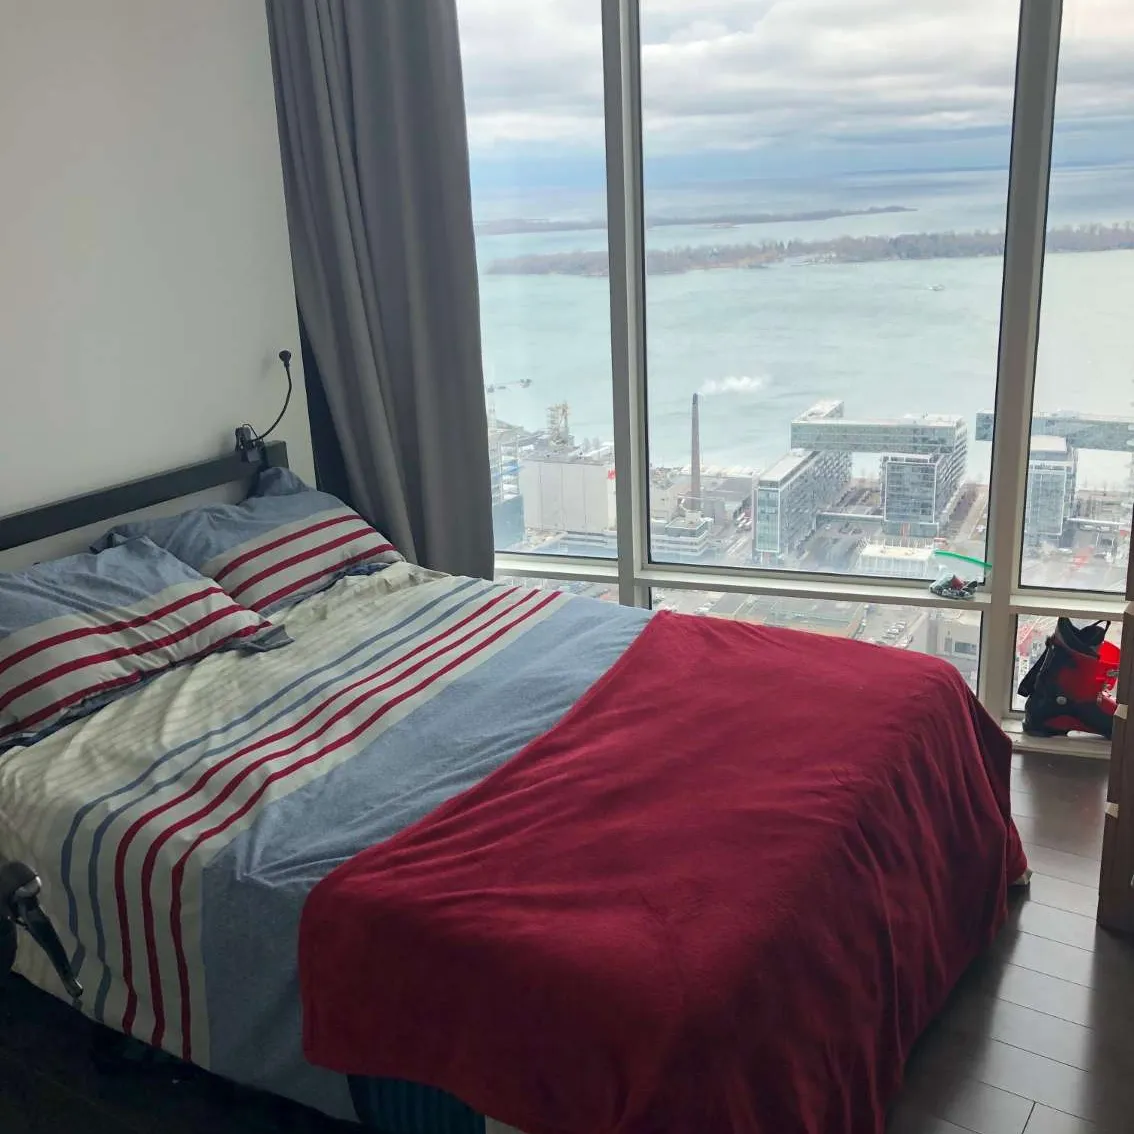 Financial District Condo Room for Rent, $1600/month photo 1